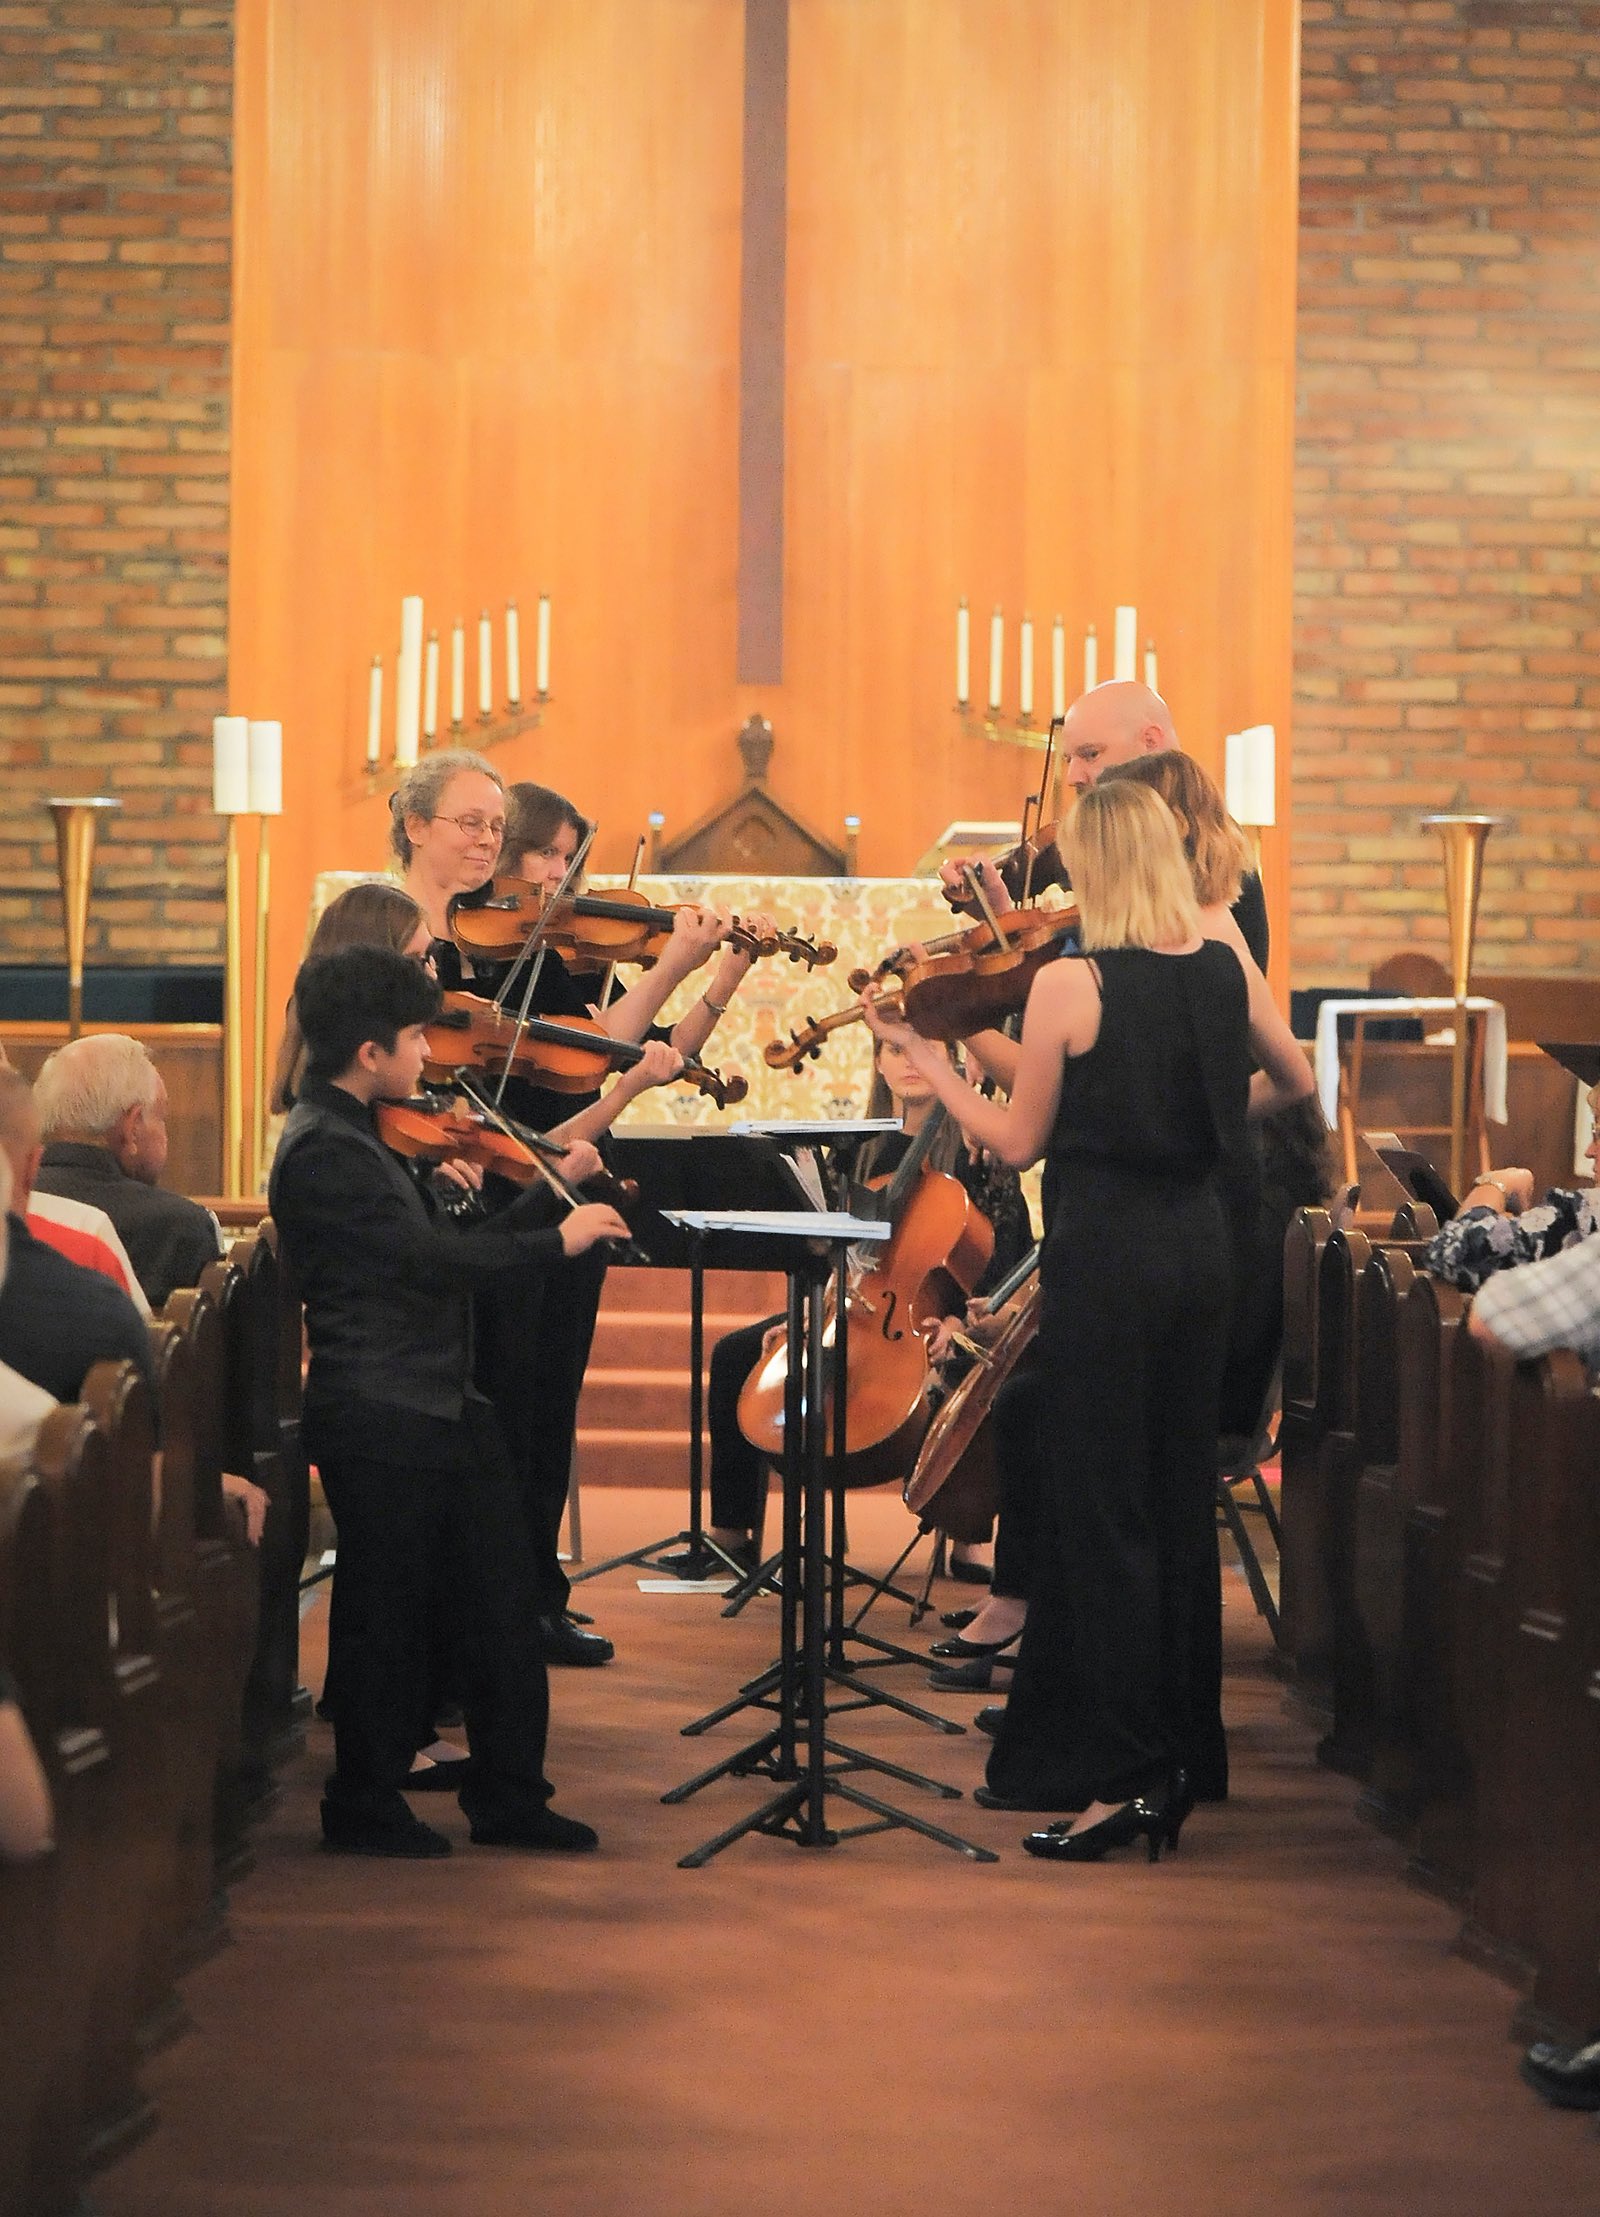 Performers stand playing string instruments in a church